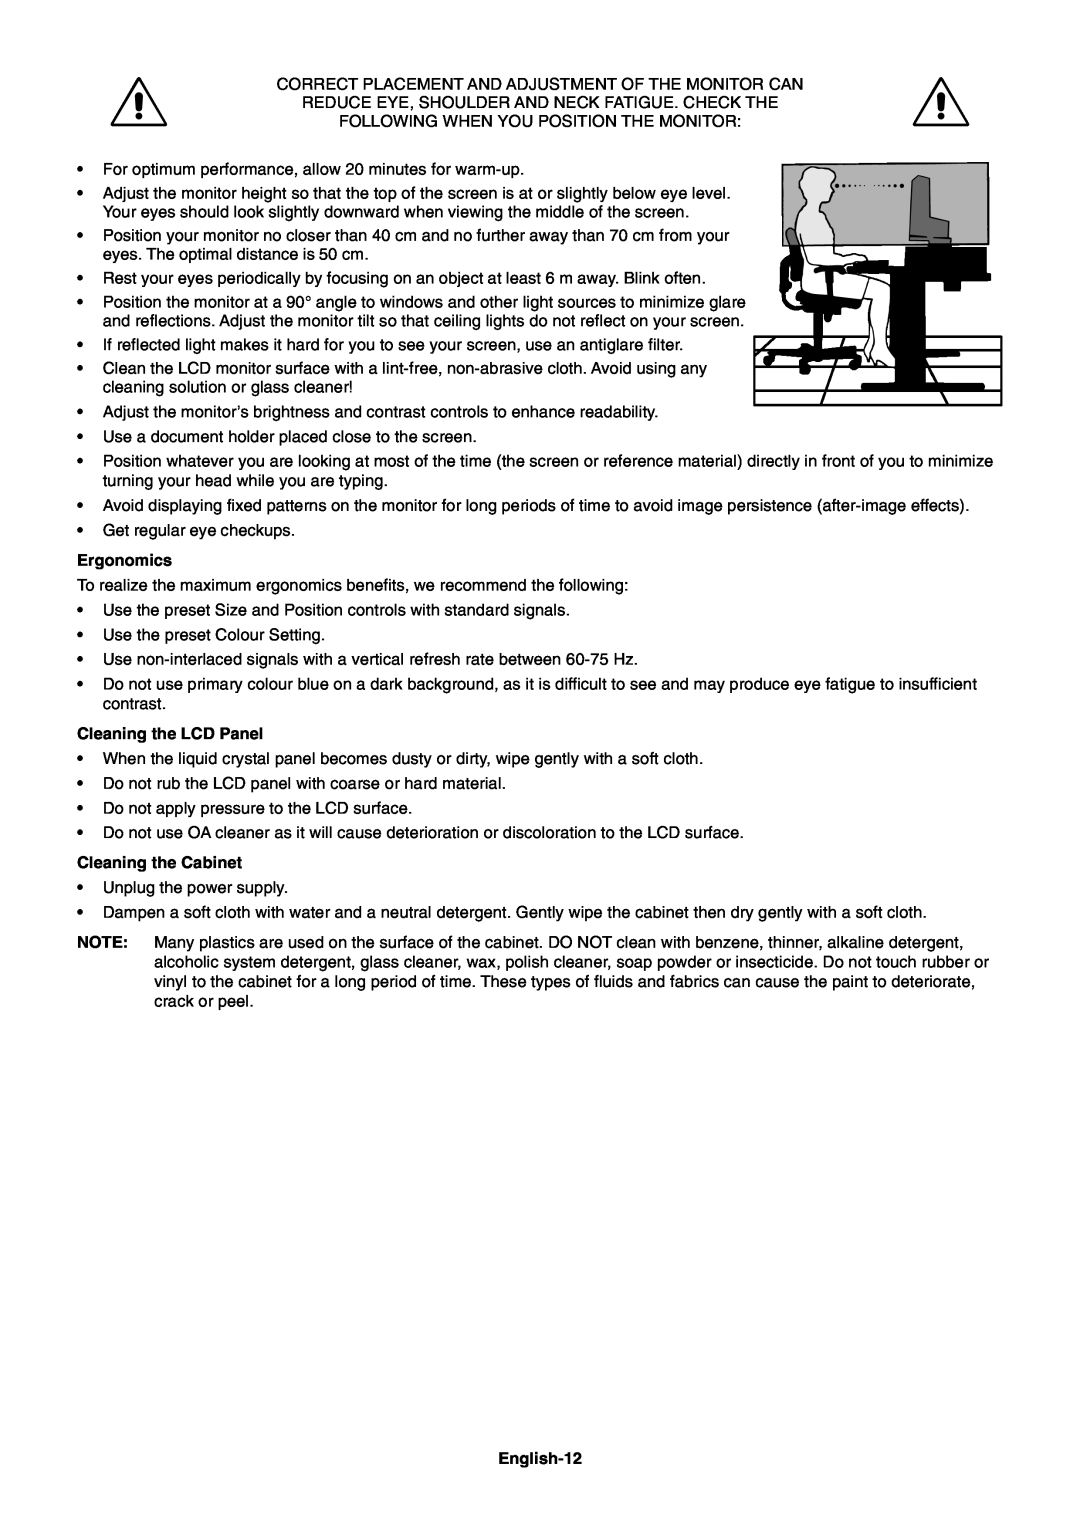 NEC LCD22WMGX user manual Ergonomics, Cleaning the LCD Panel, Cleaning the Cabinet, English-12 